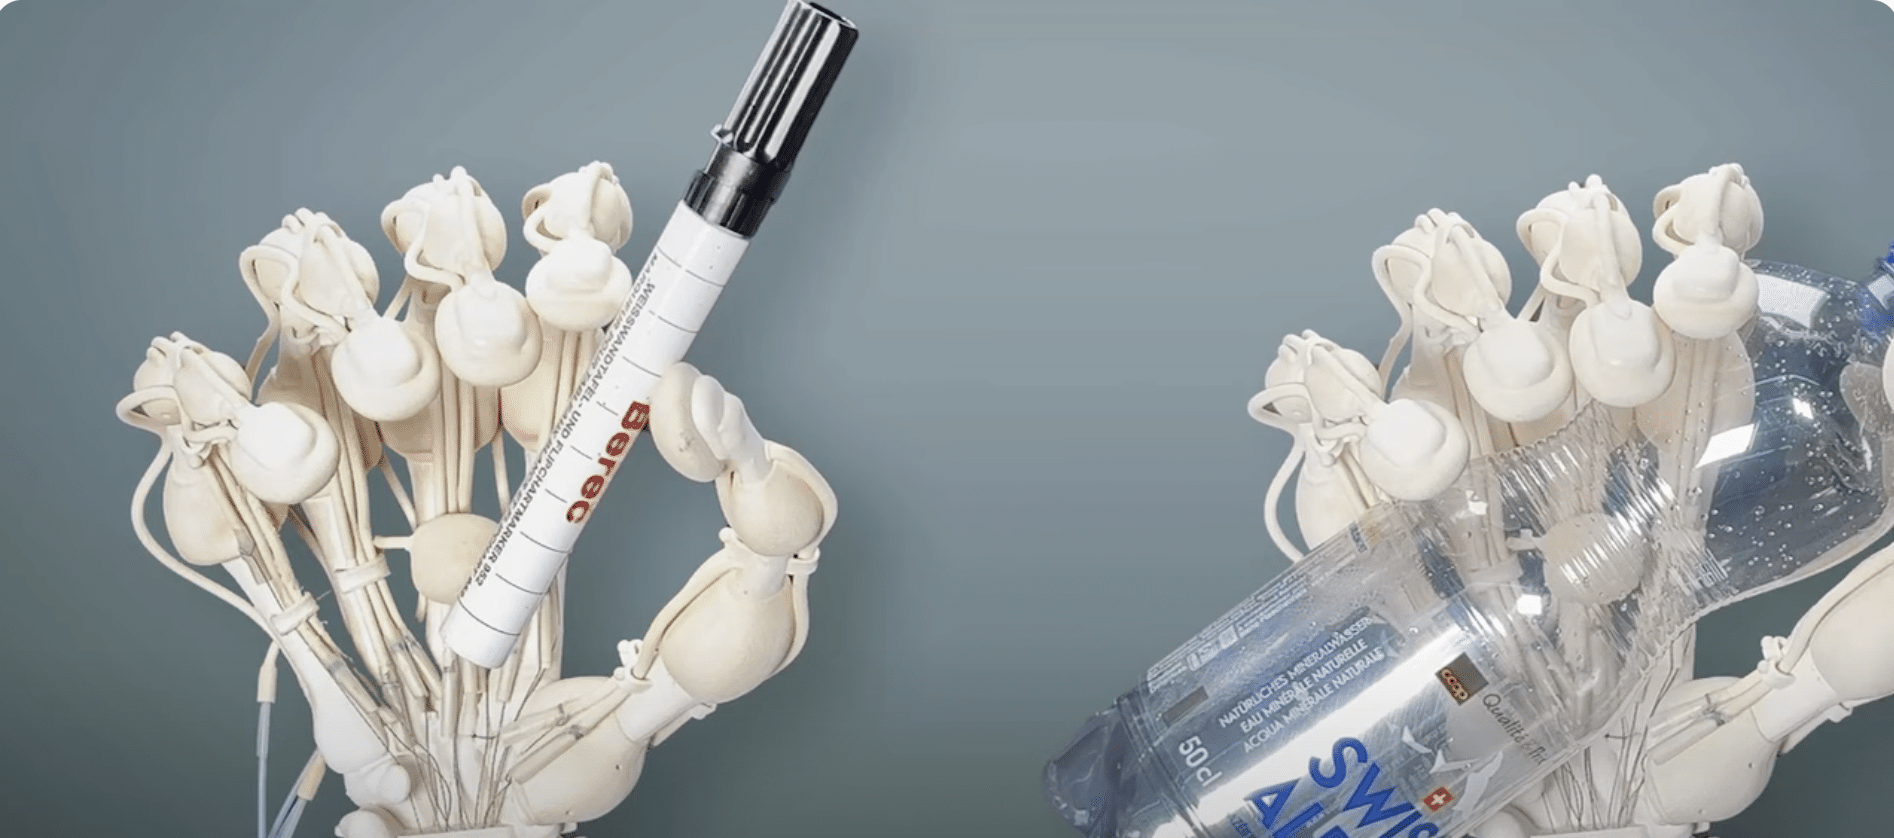 For the first time, Researchers have printed a robotic hand with bones, ligaments and tendons